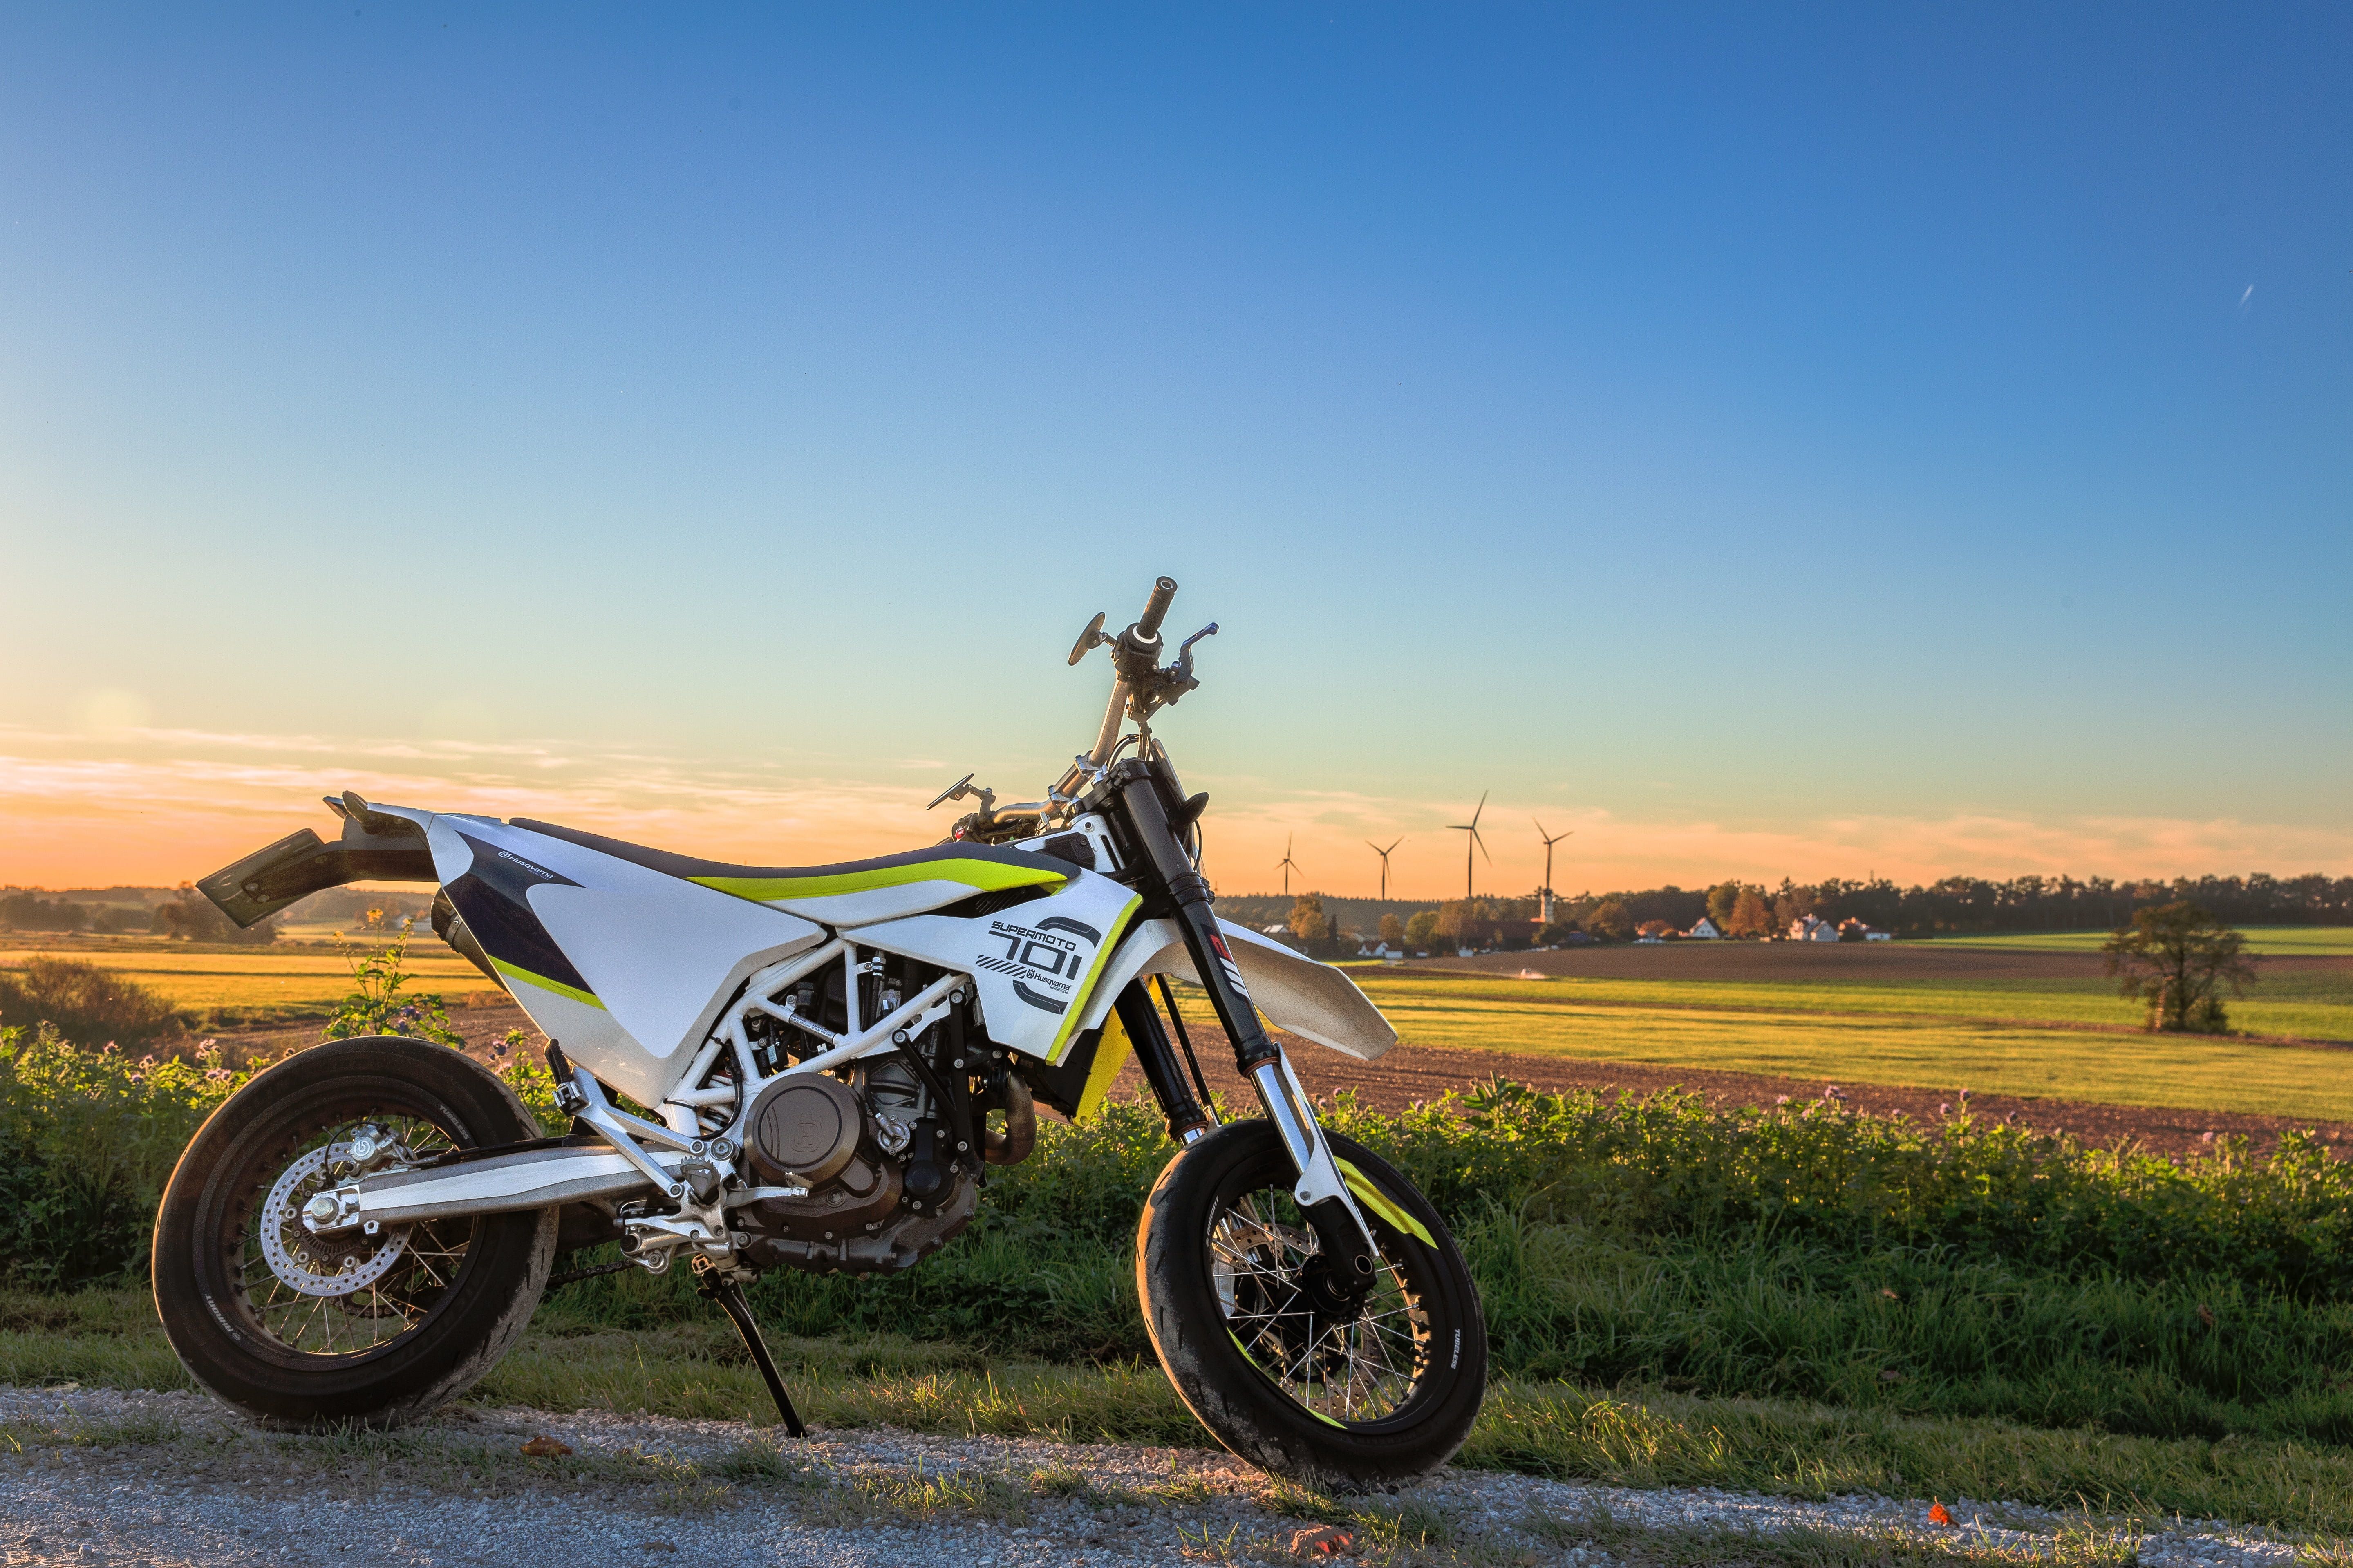 motorcycle #hdr #autumn high quality #husqvarna #nature #sunset #road #supermoto #meadow K #wallpaper #hdwallpaper #d. Motorcycle, Husqvarna, HD wallpaper